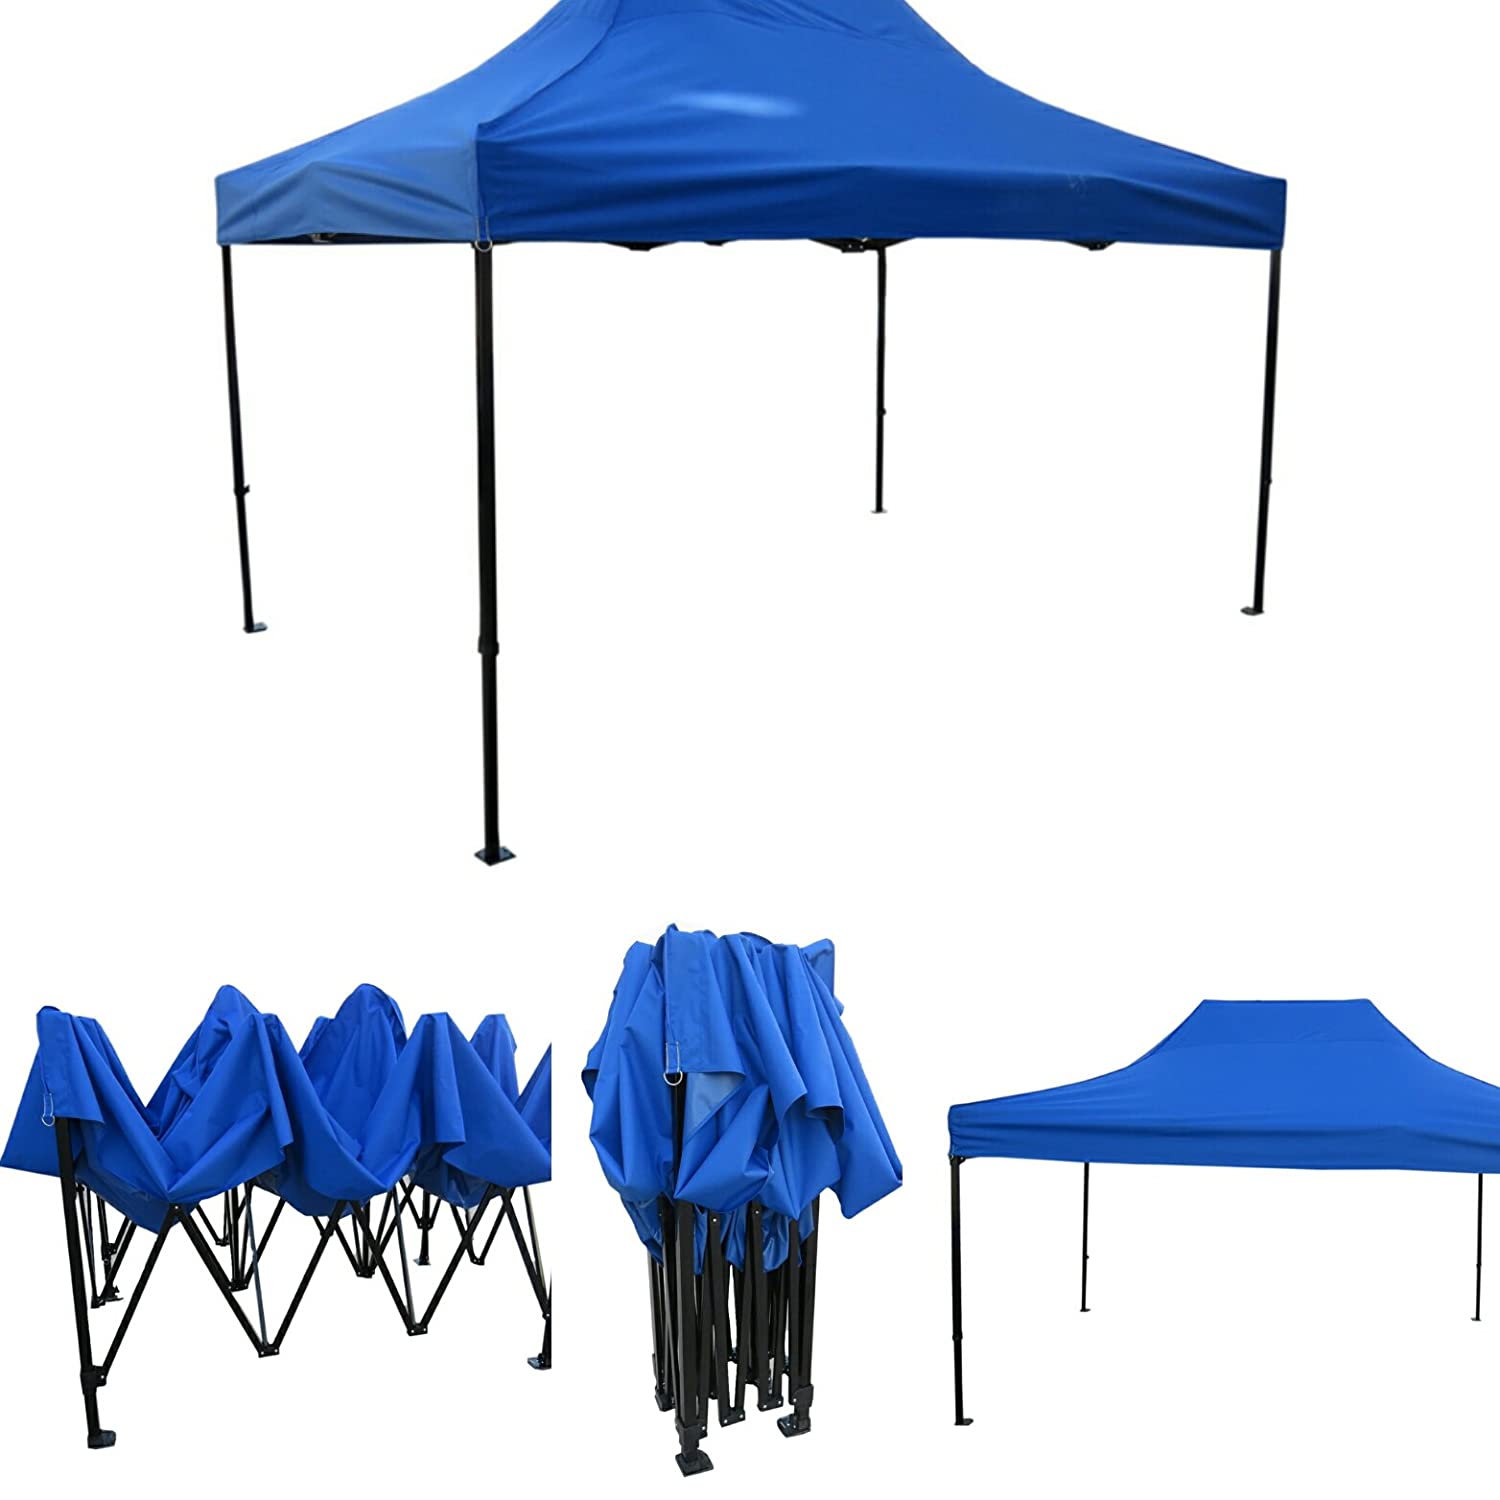 What tools can a commercial tent (namiothandlowy) offer you when using it?